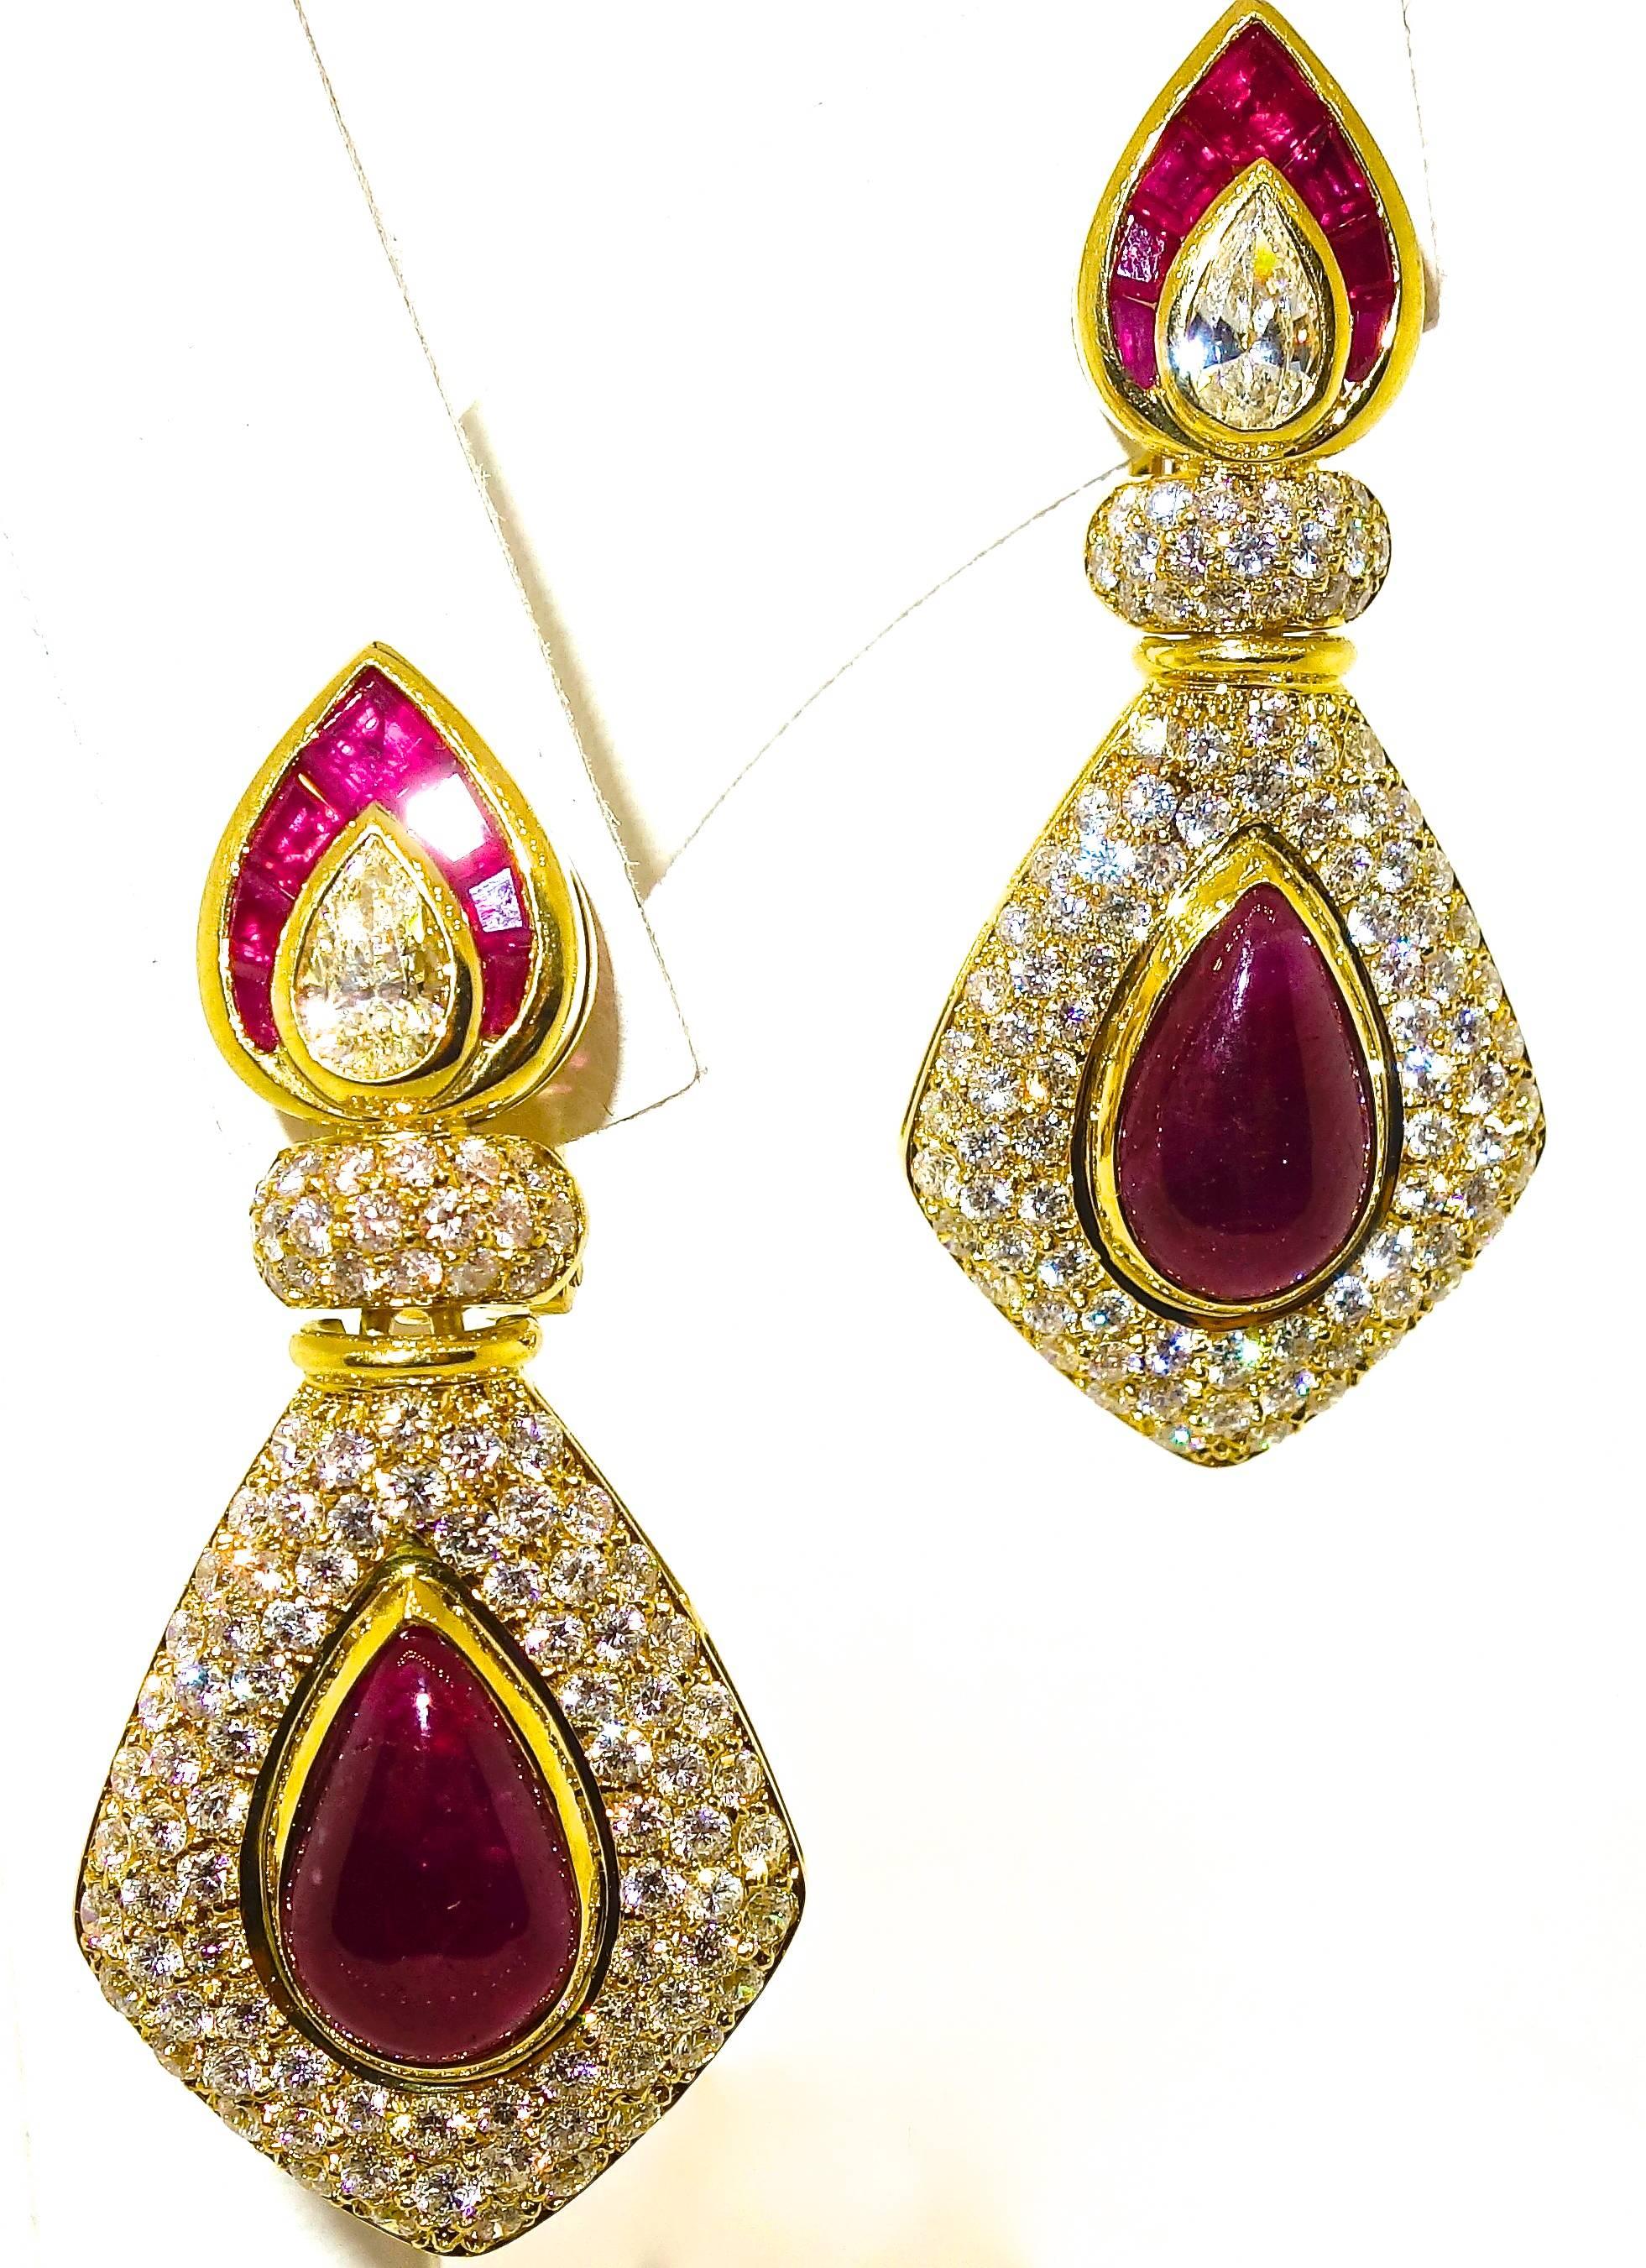 18K yellow gold pendant style earrings possessing 22 fine red rubies weighing approximately 8 cts.  These bright stones are accented with fine white pave set diamonds - all H (near colorless) and very slightly included (VS), (TW 2.75 cts).  The